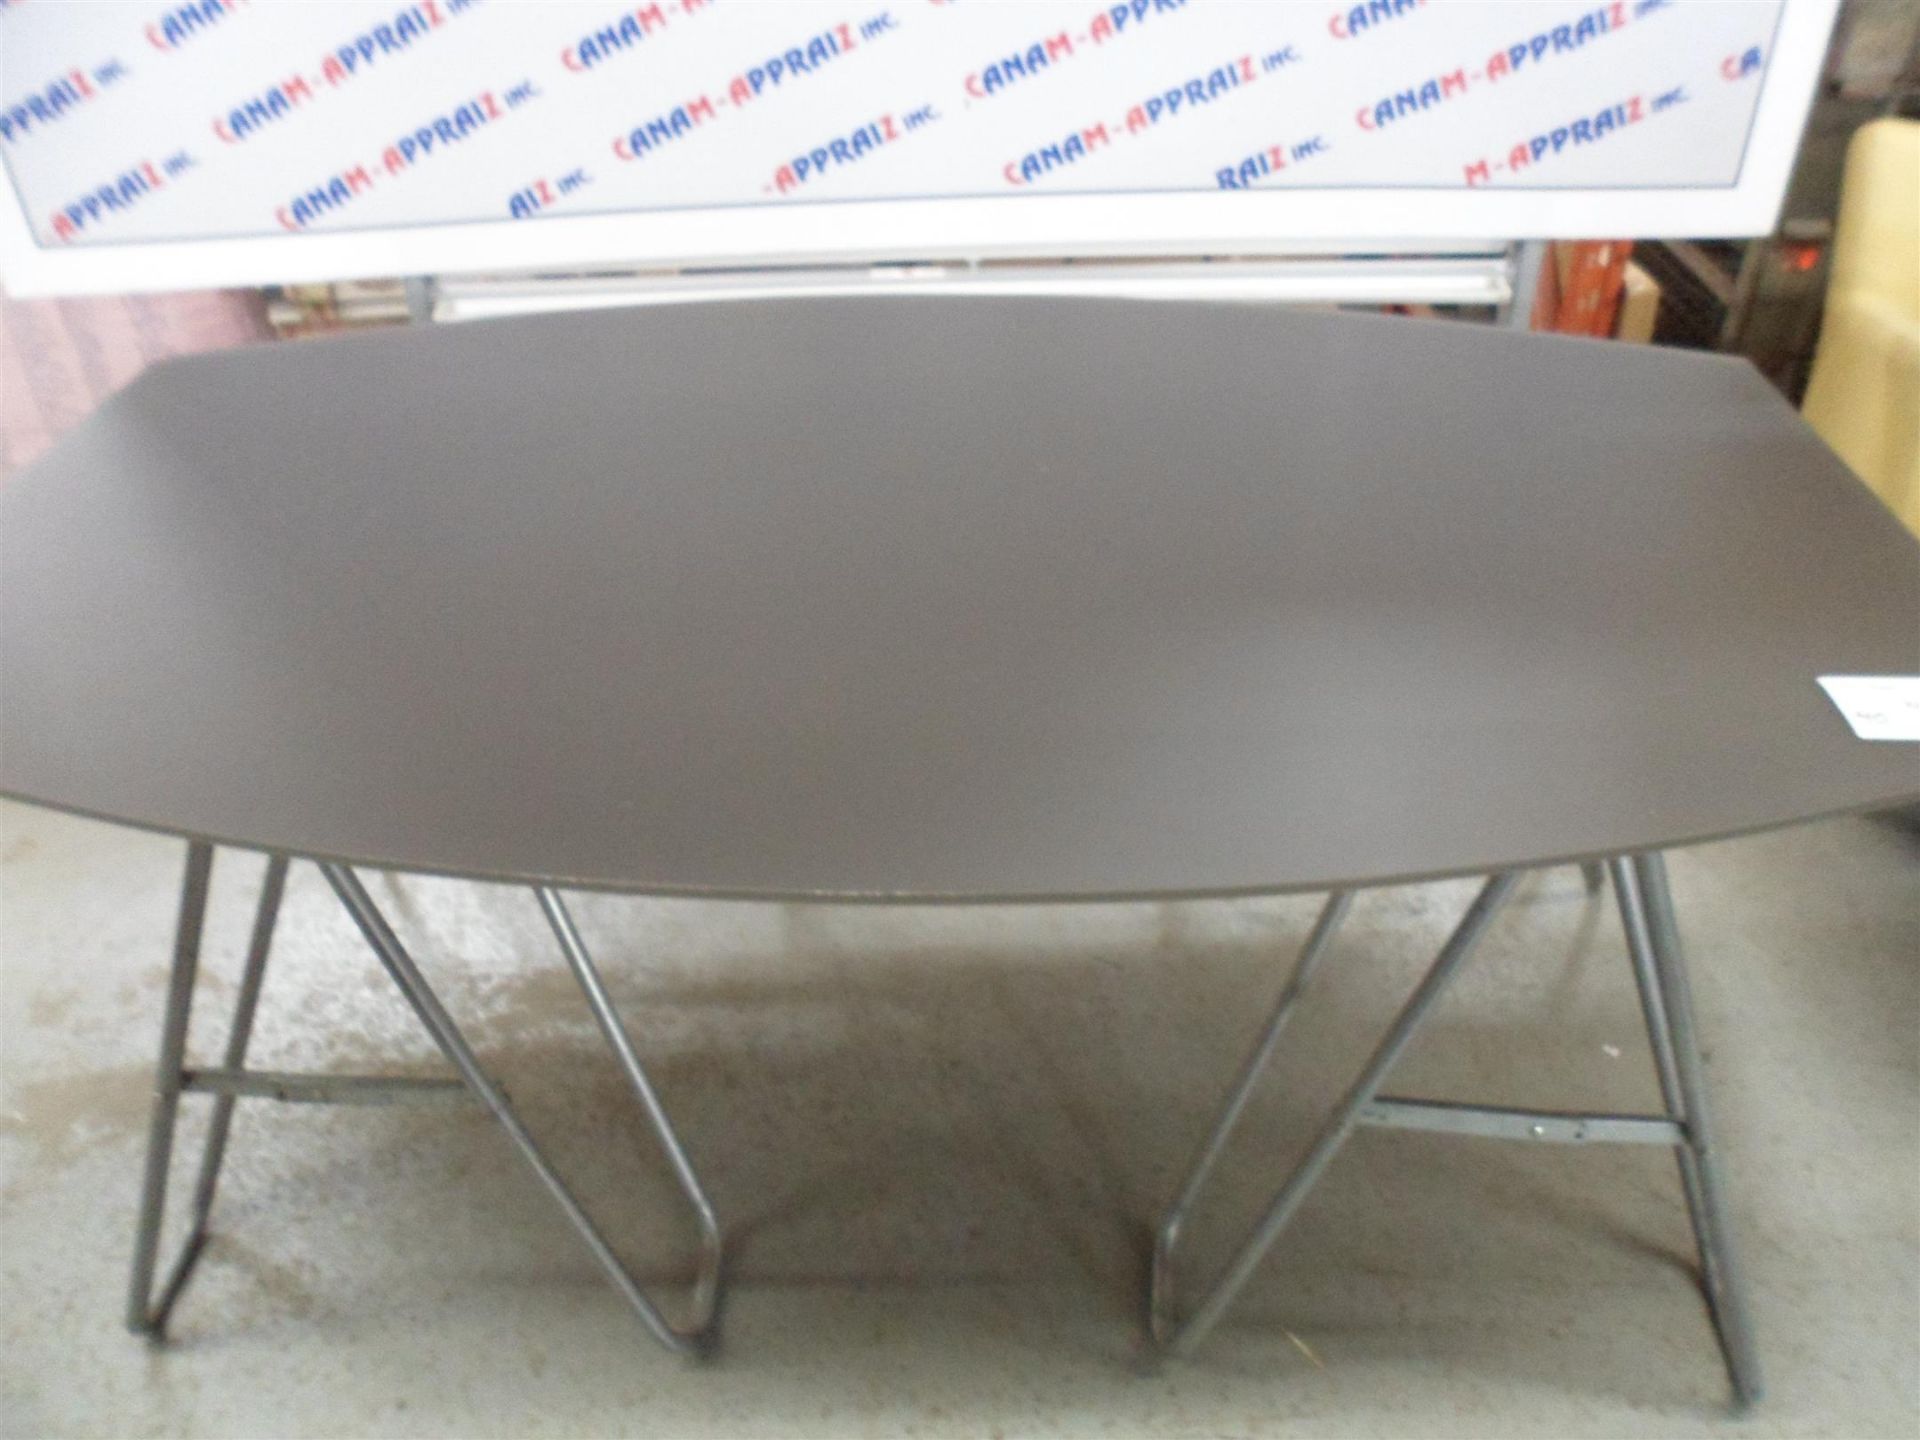 CURVED GLASS TABLE TOP - 72" X 42"